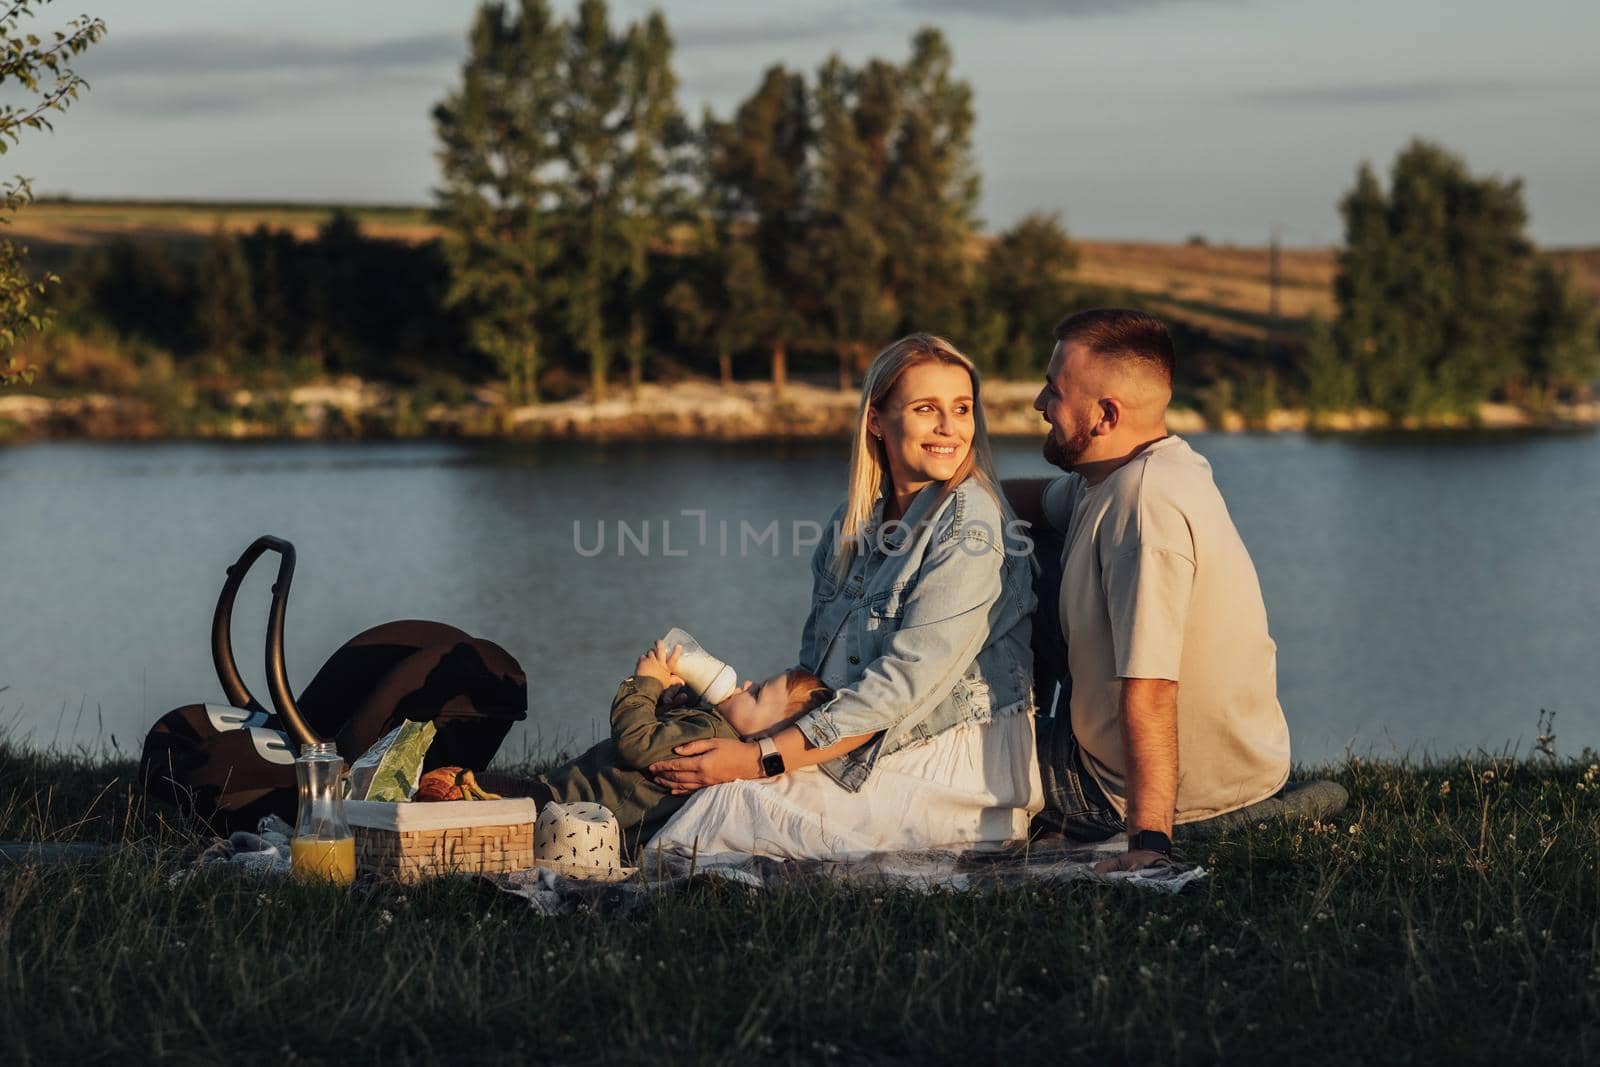 Couple with Their Little Son Having Picnic Outdoors by the Lake, Young Family Enjoying Weekend Together